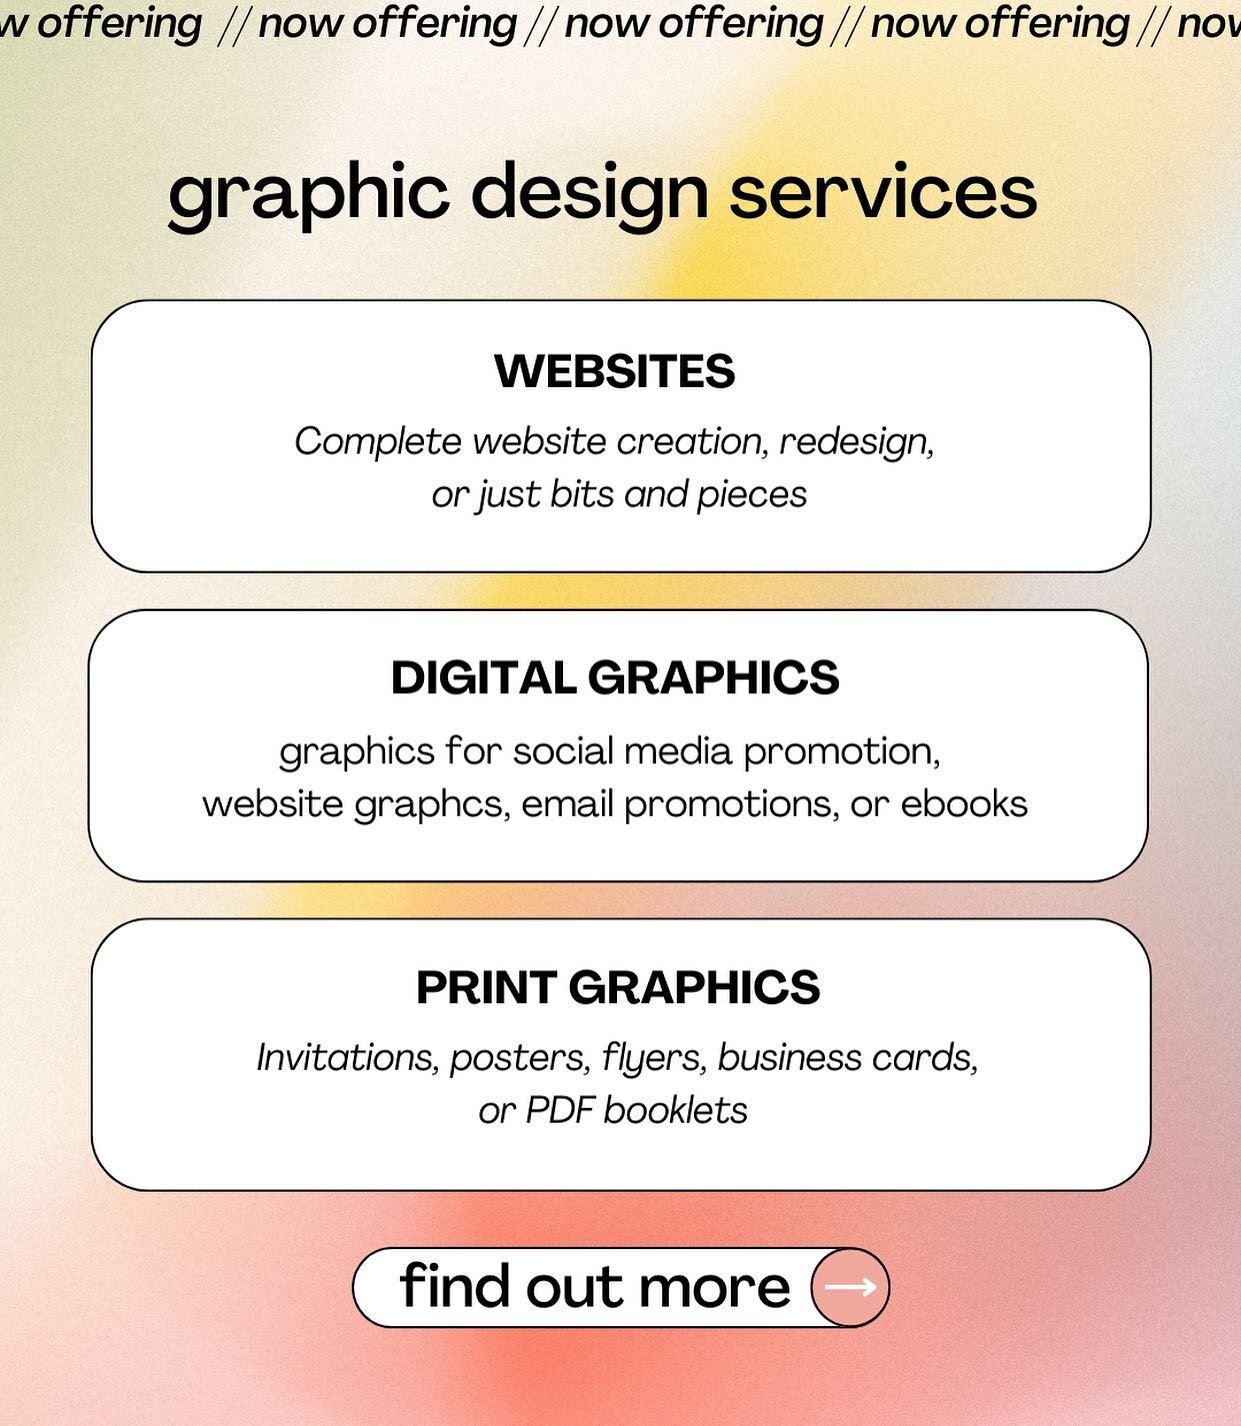 In case you didn&rsquo;t know, I offer a variety of services starting with graphic design pieces. Whether you&rsquo;re looking for website designs, digital or print graphics, I can be your designer. 
If you&rsquo;re a photographer or creative looking